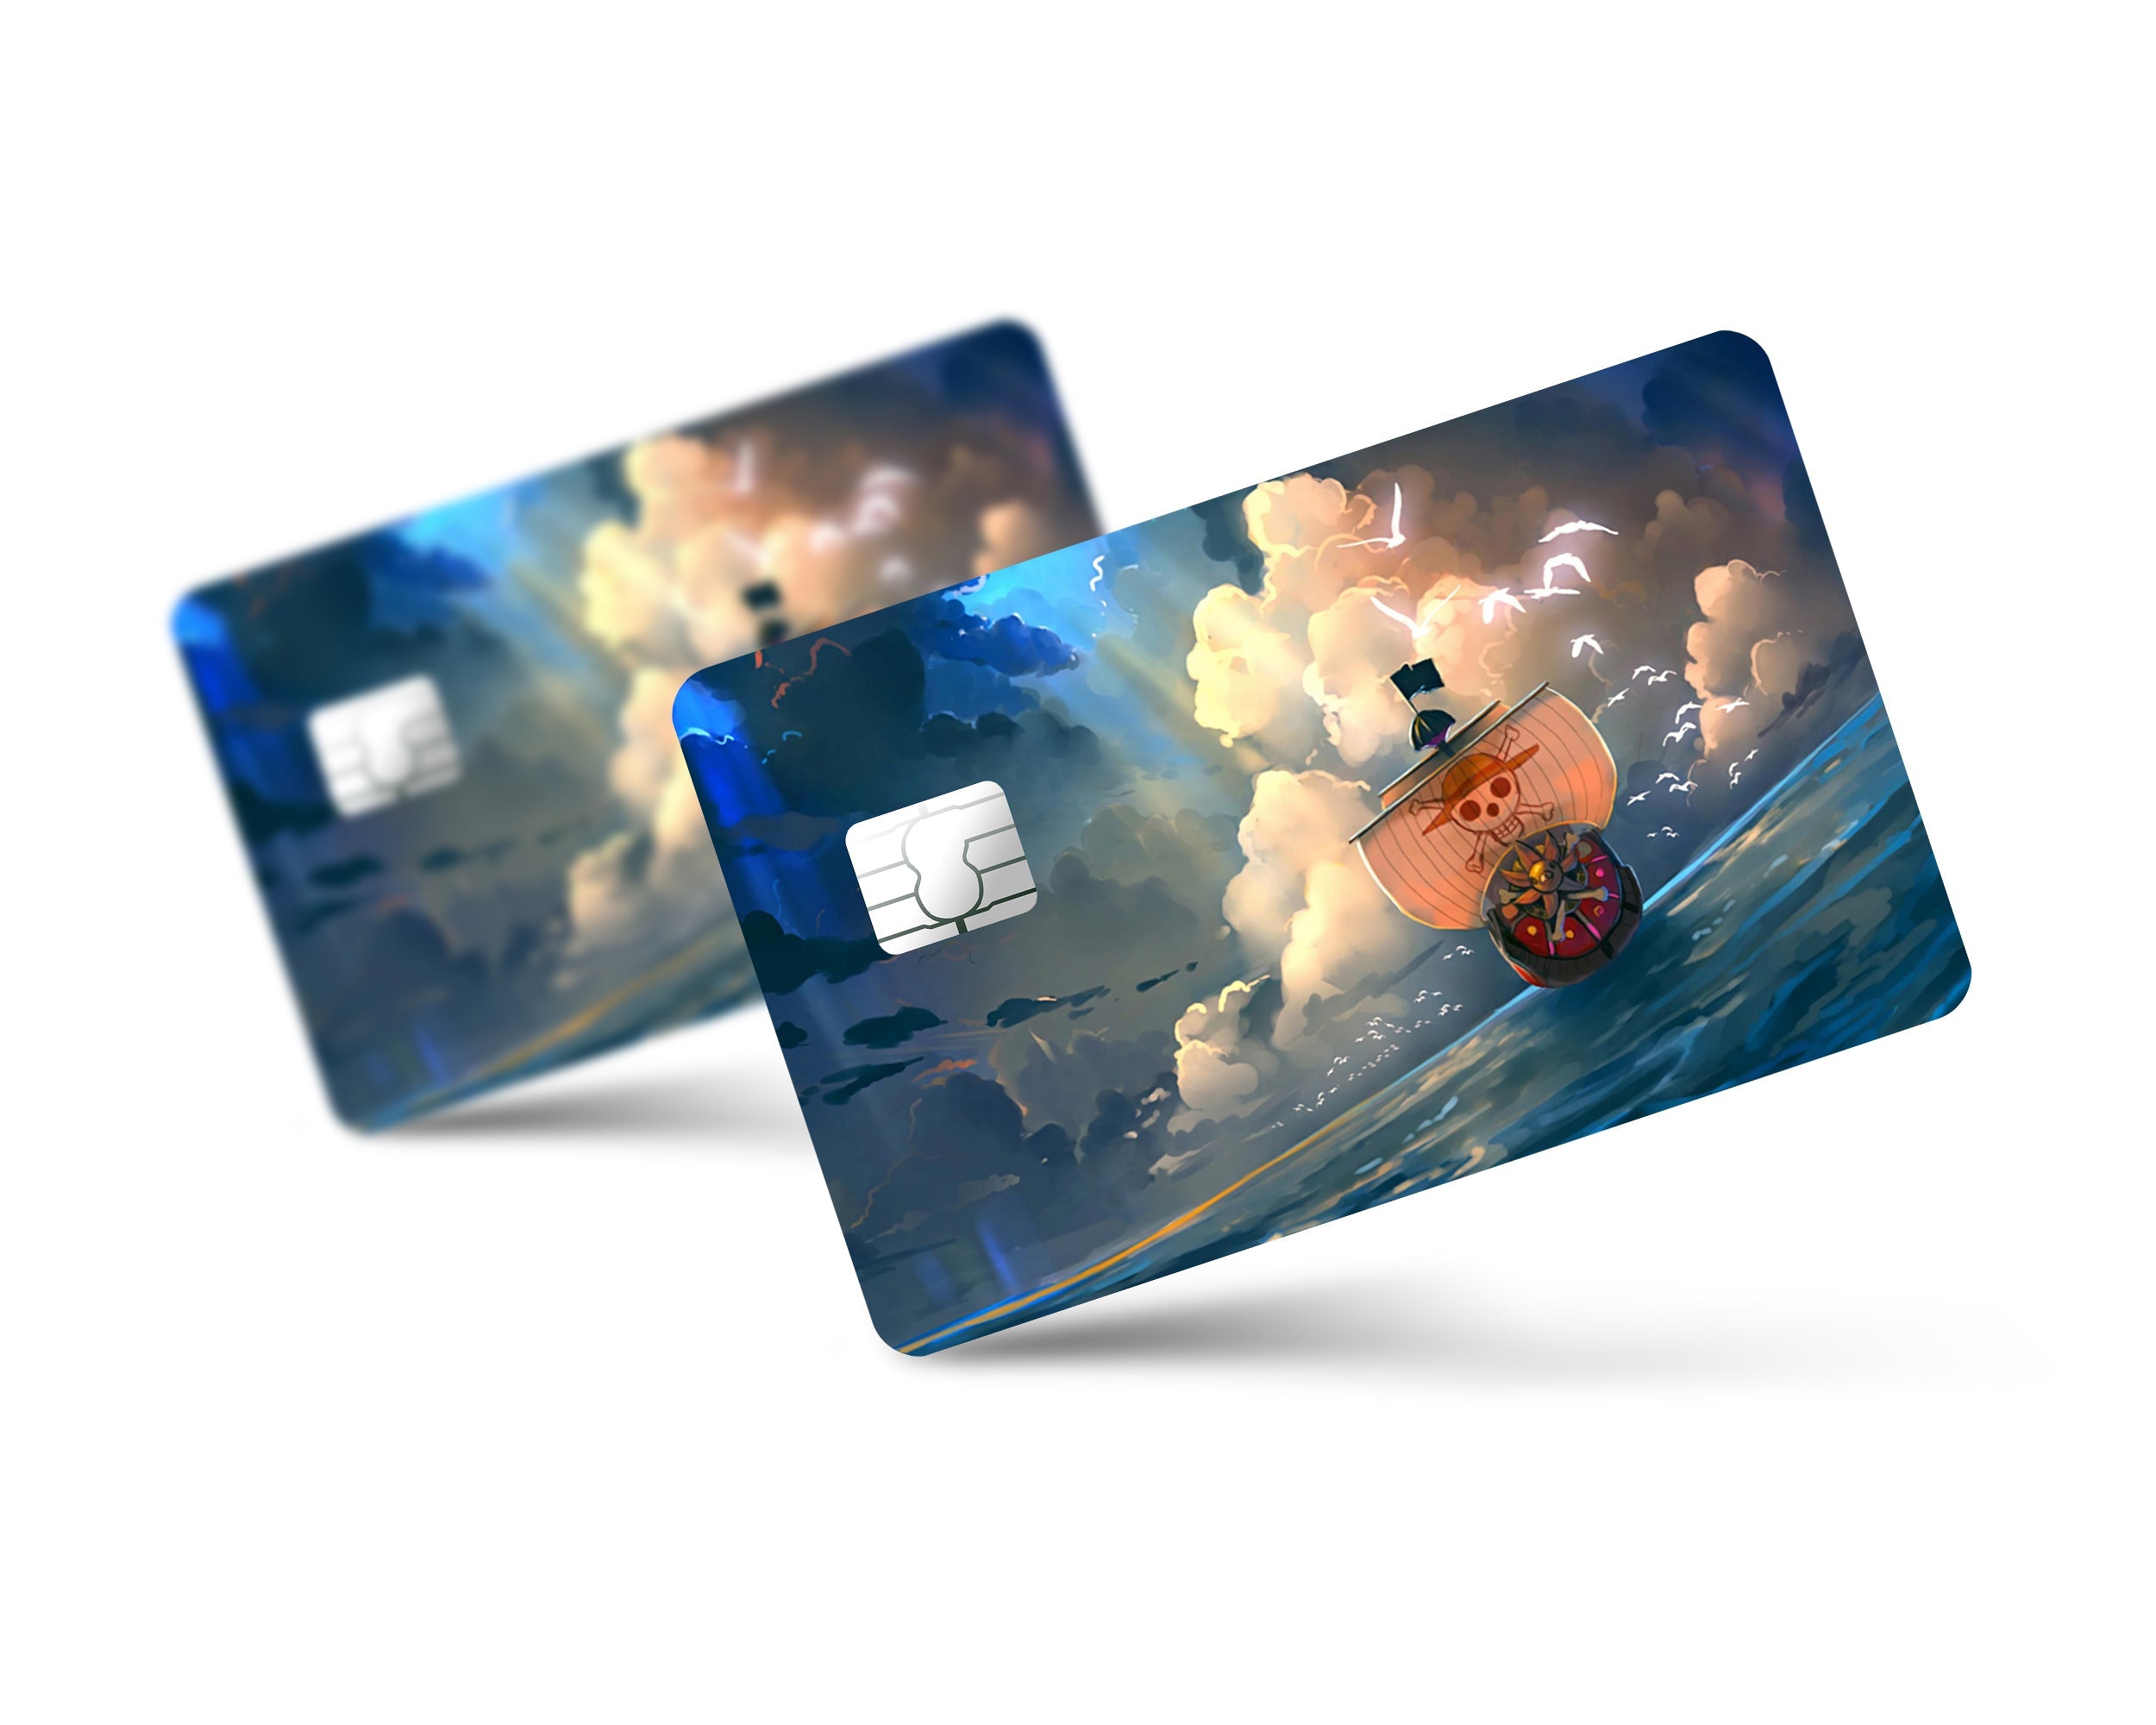 Custom Anime One Piece "Wanted" Credit Card Debit Card Skin Vinyl  (Small Chip)